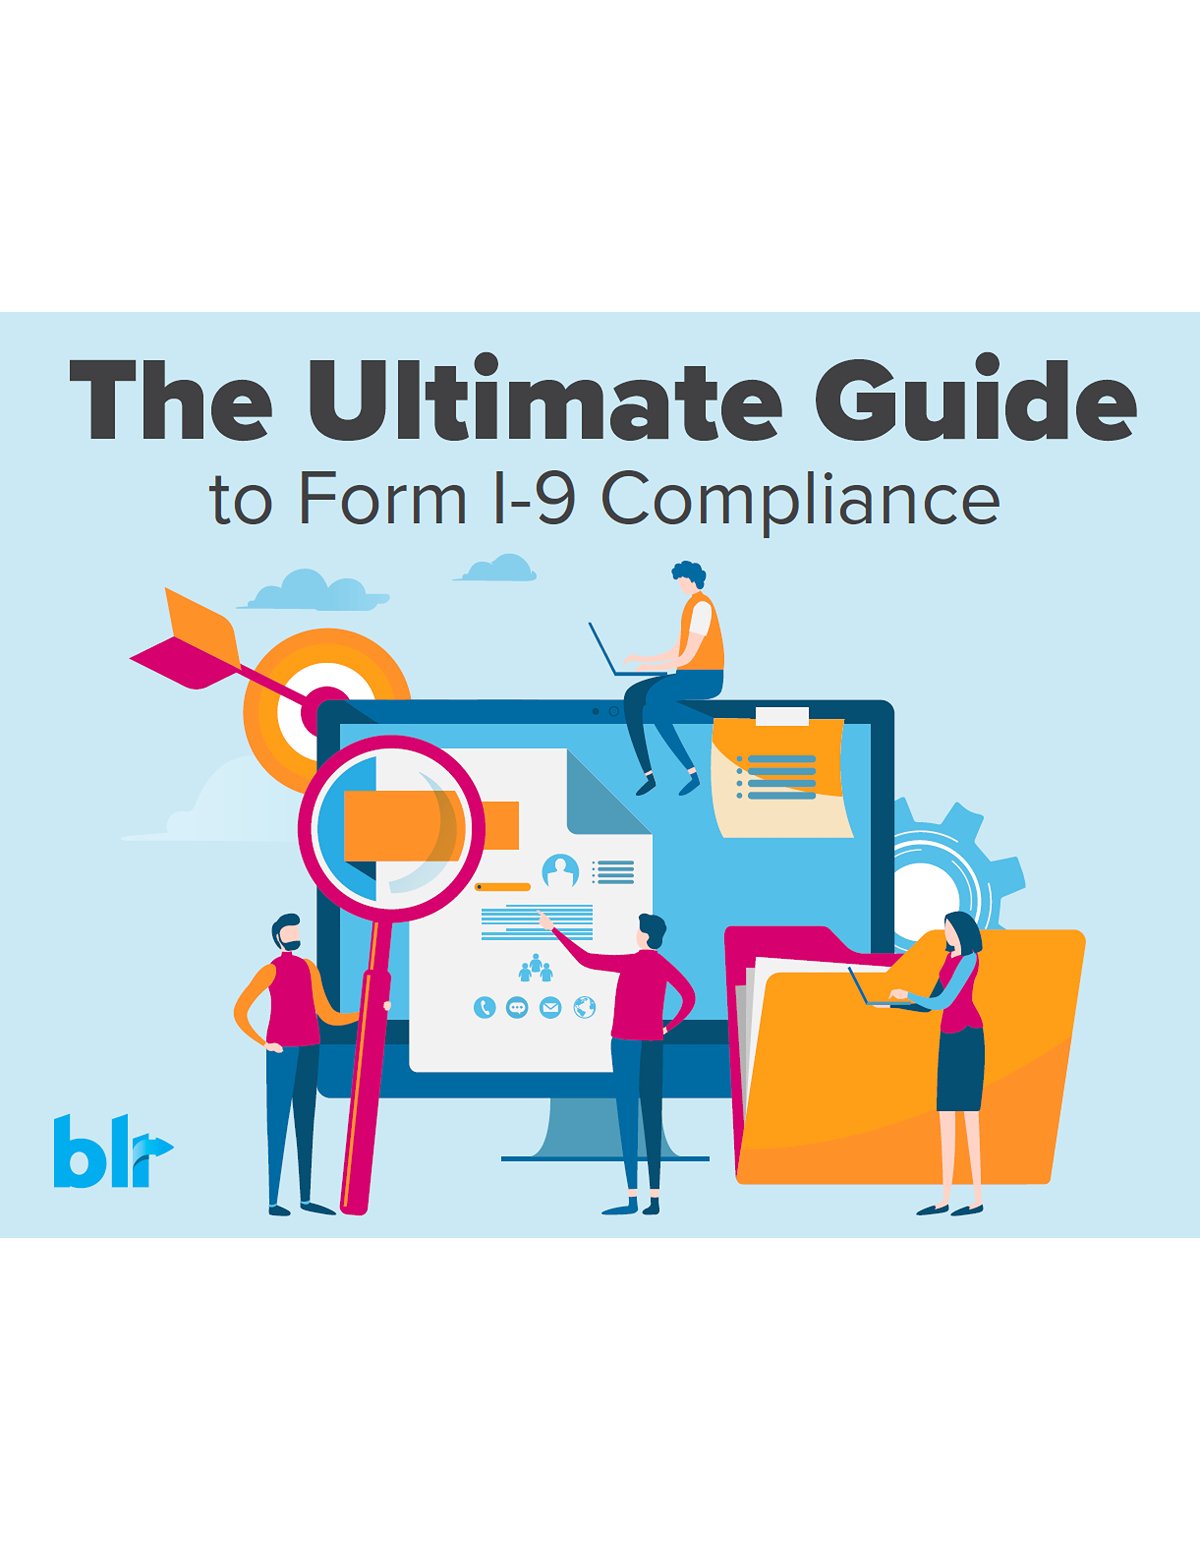 The ultimate guide to Form I-9 compliance